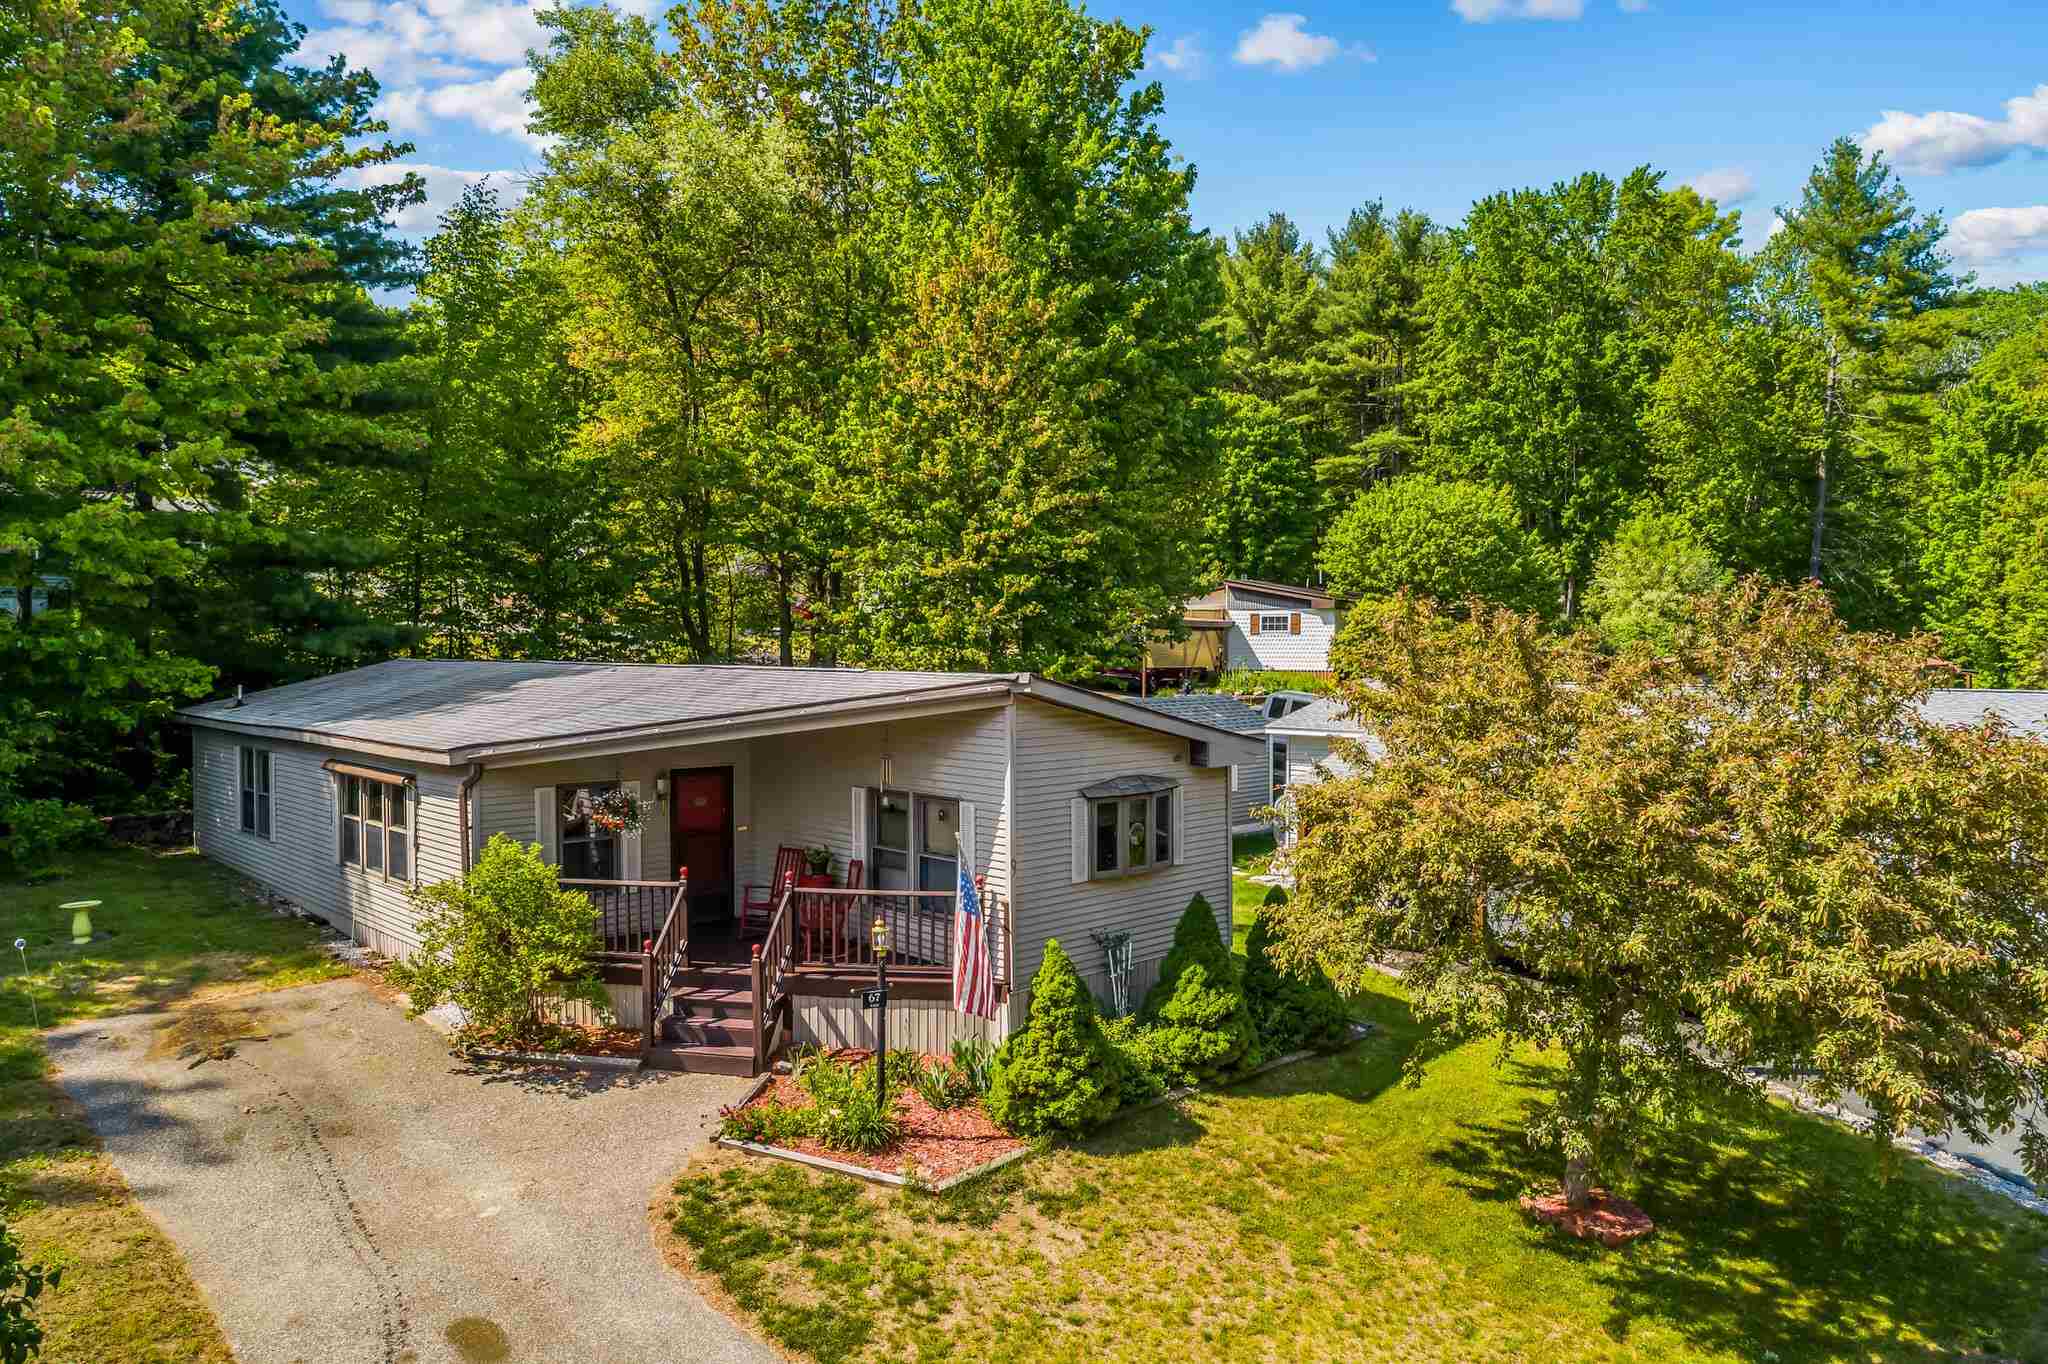 67 Roger Road Goffstown, NH Photo